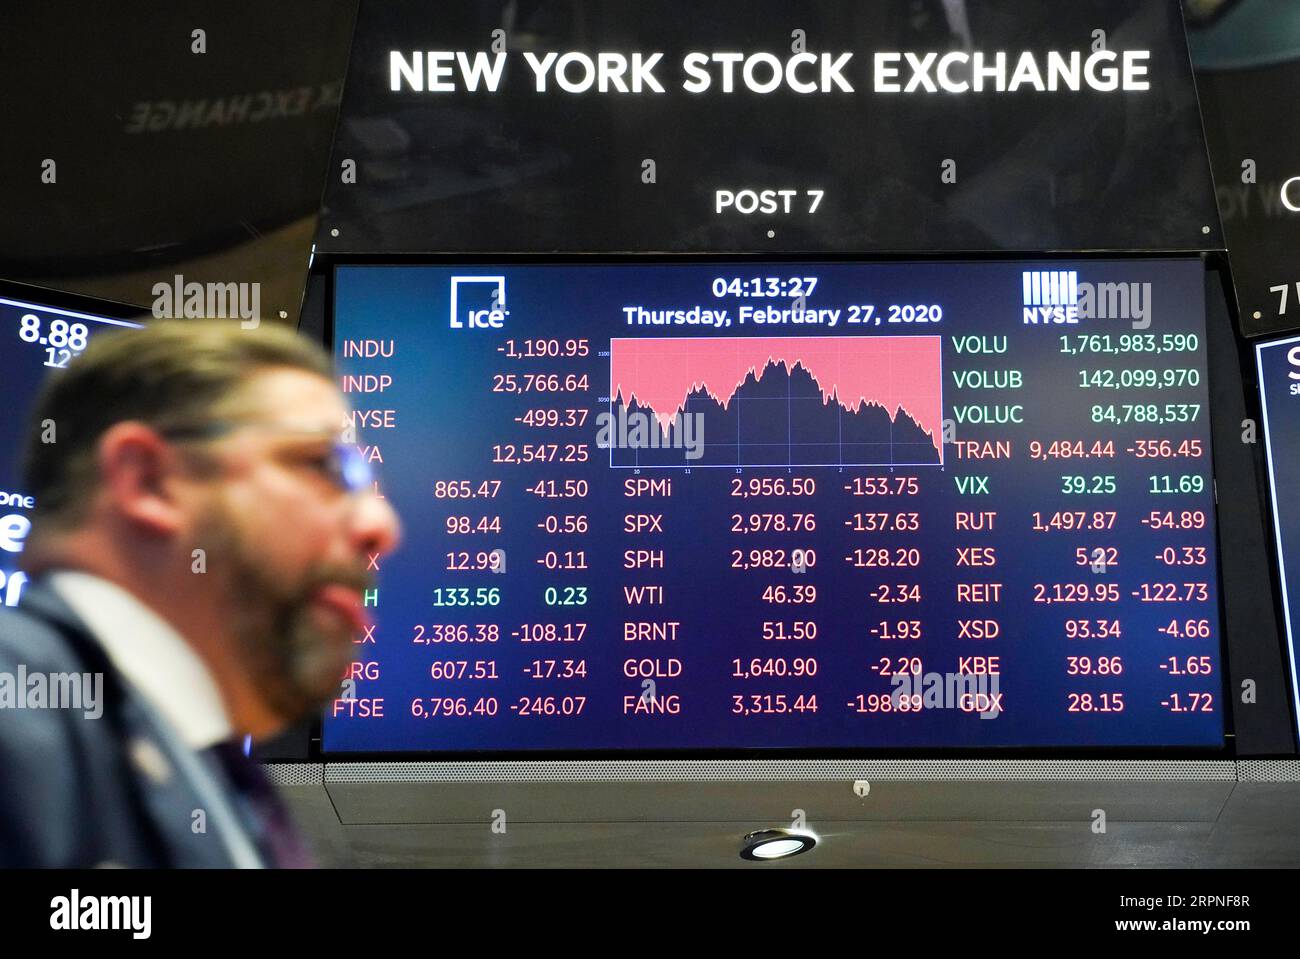 200227 -- NEW YORK, Feb. 27, 2020 -- An electronic screen shows the trading data at the New York Stock Exchange in New York, the United States, Feb. 27, 2020. U.S. stocks closed sharply lower on Thursday as investors fled the stocks market and flocked into safe-haven assets. The Dow Jones Industrial Average fell 1,190.95 points, or 4.42 percent, to 25,766.64. The S&P 500 was down 137.63 points, or 4.42 percent, to 2,978.76. The Nasdaq Composite Index was down 414.29 points, or 4.61 percent, to 8,566.48.  U.S.-NEW YORK-STOCKS WangxYing PUBLICATIONxNOTxINxCHN Stock Photo